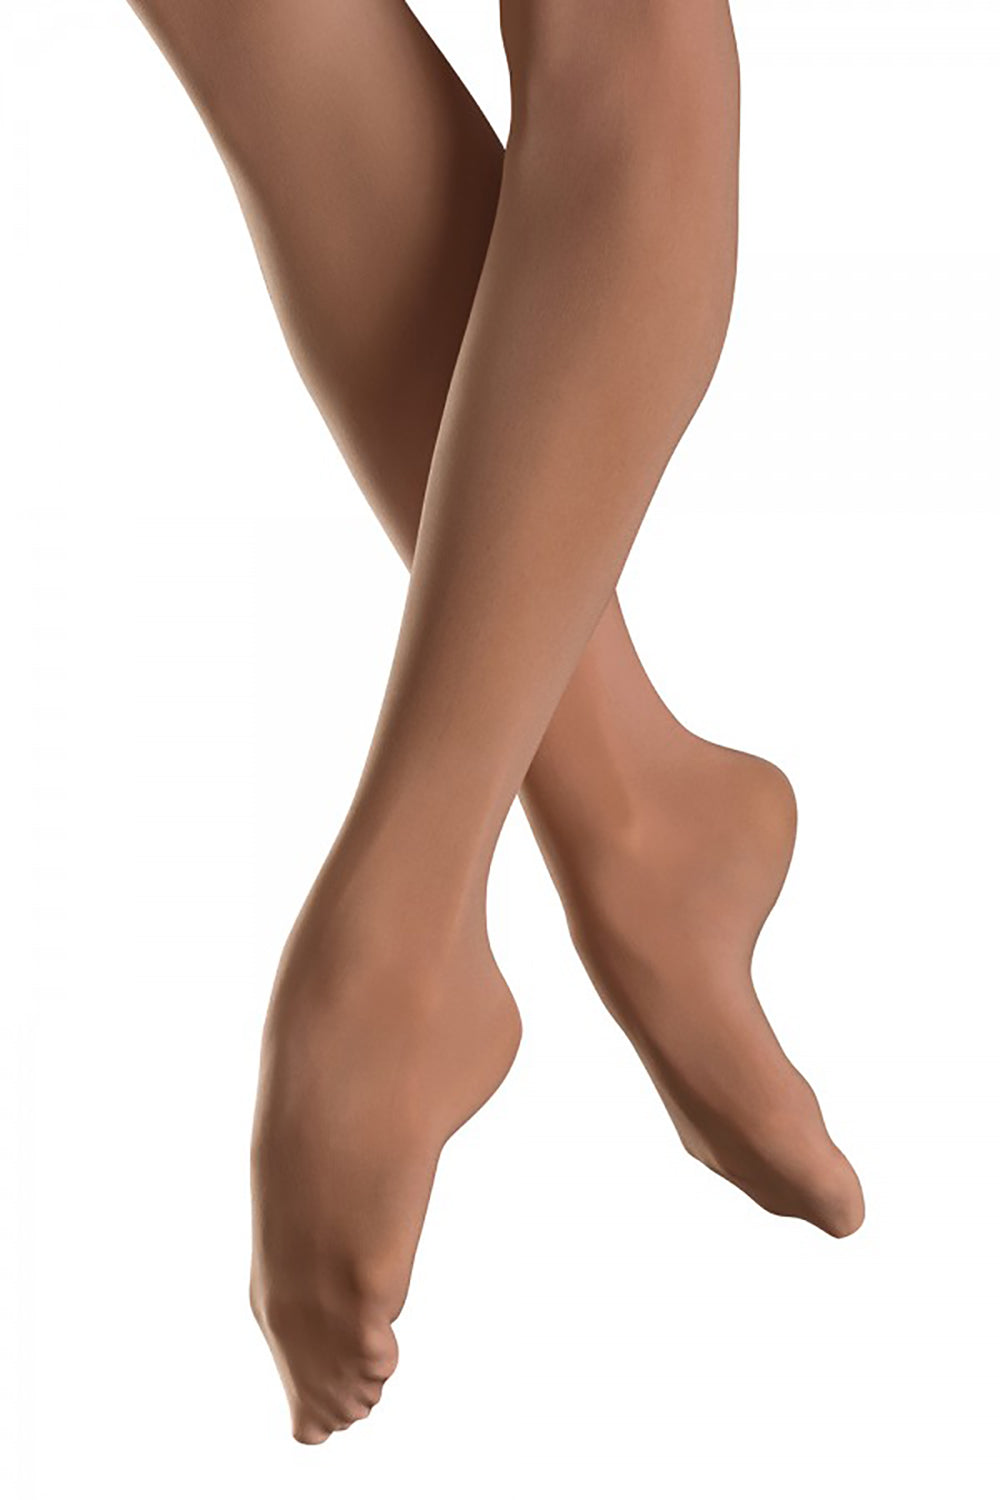 BLOCH T0921G GIRLS ENDURA FOOTED TIGHT – The Dance Shoppe